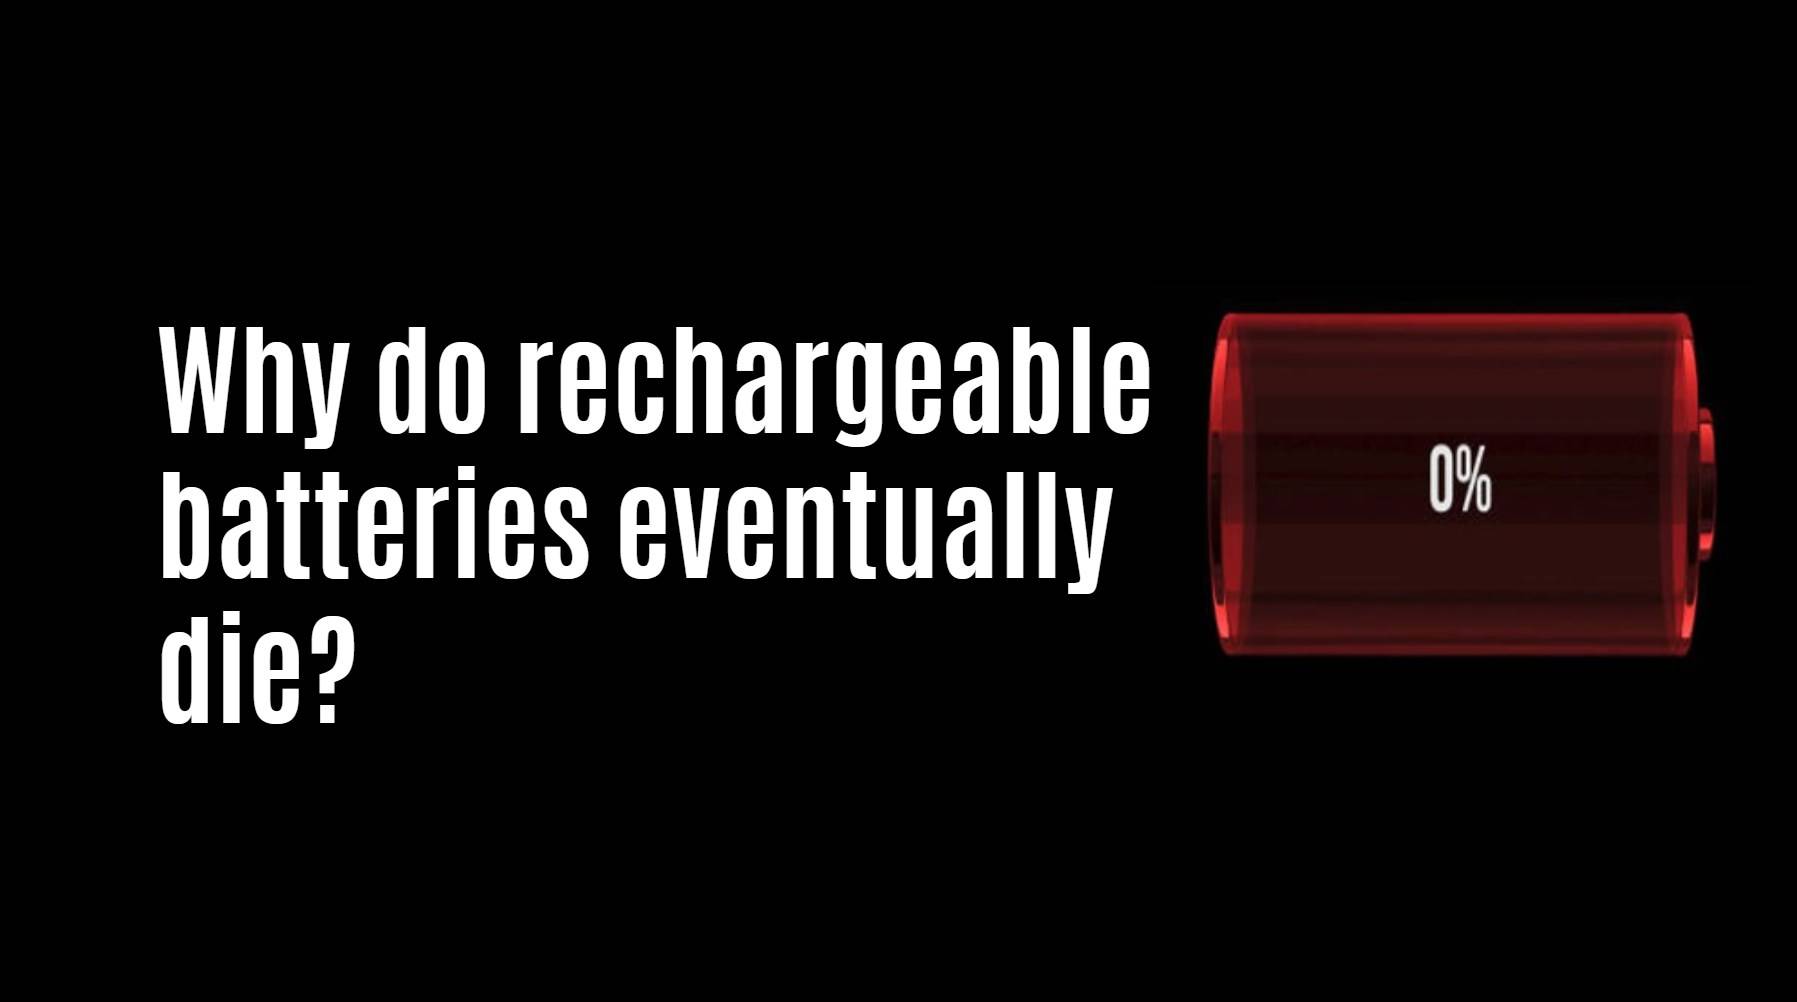 Why do rechargeable batteries eventually die?